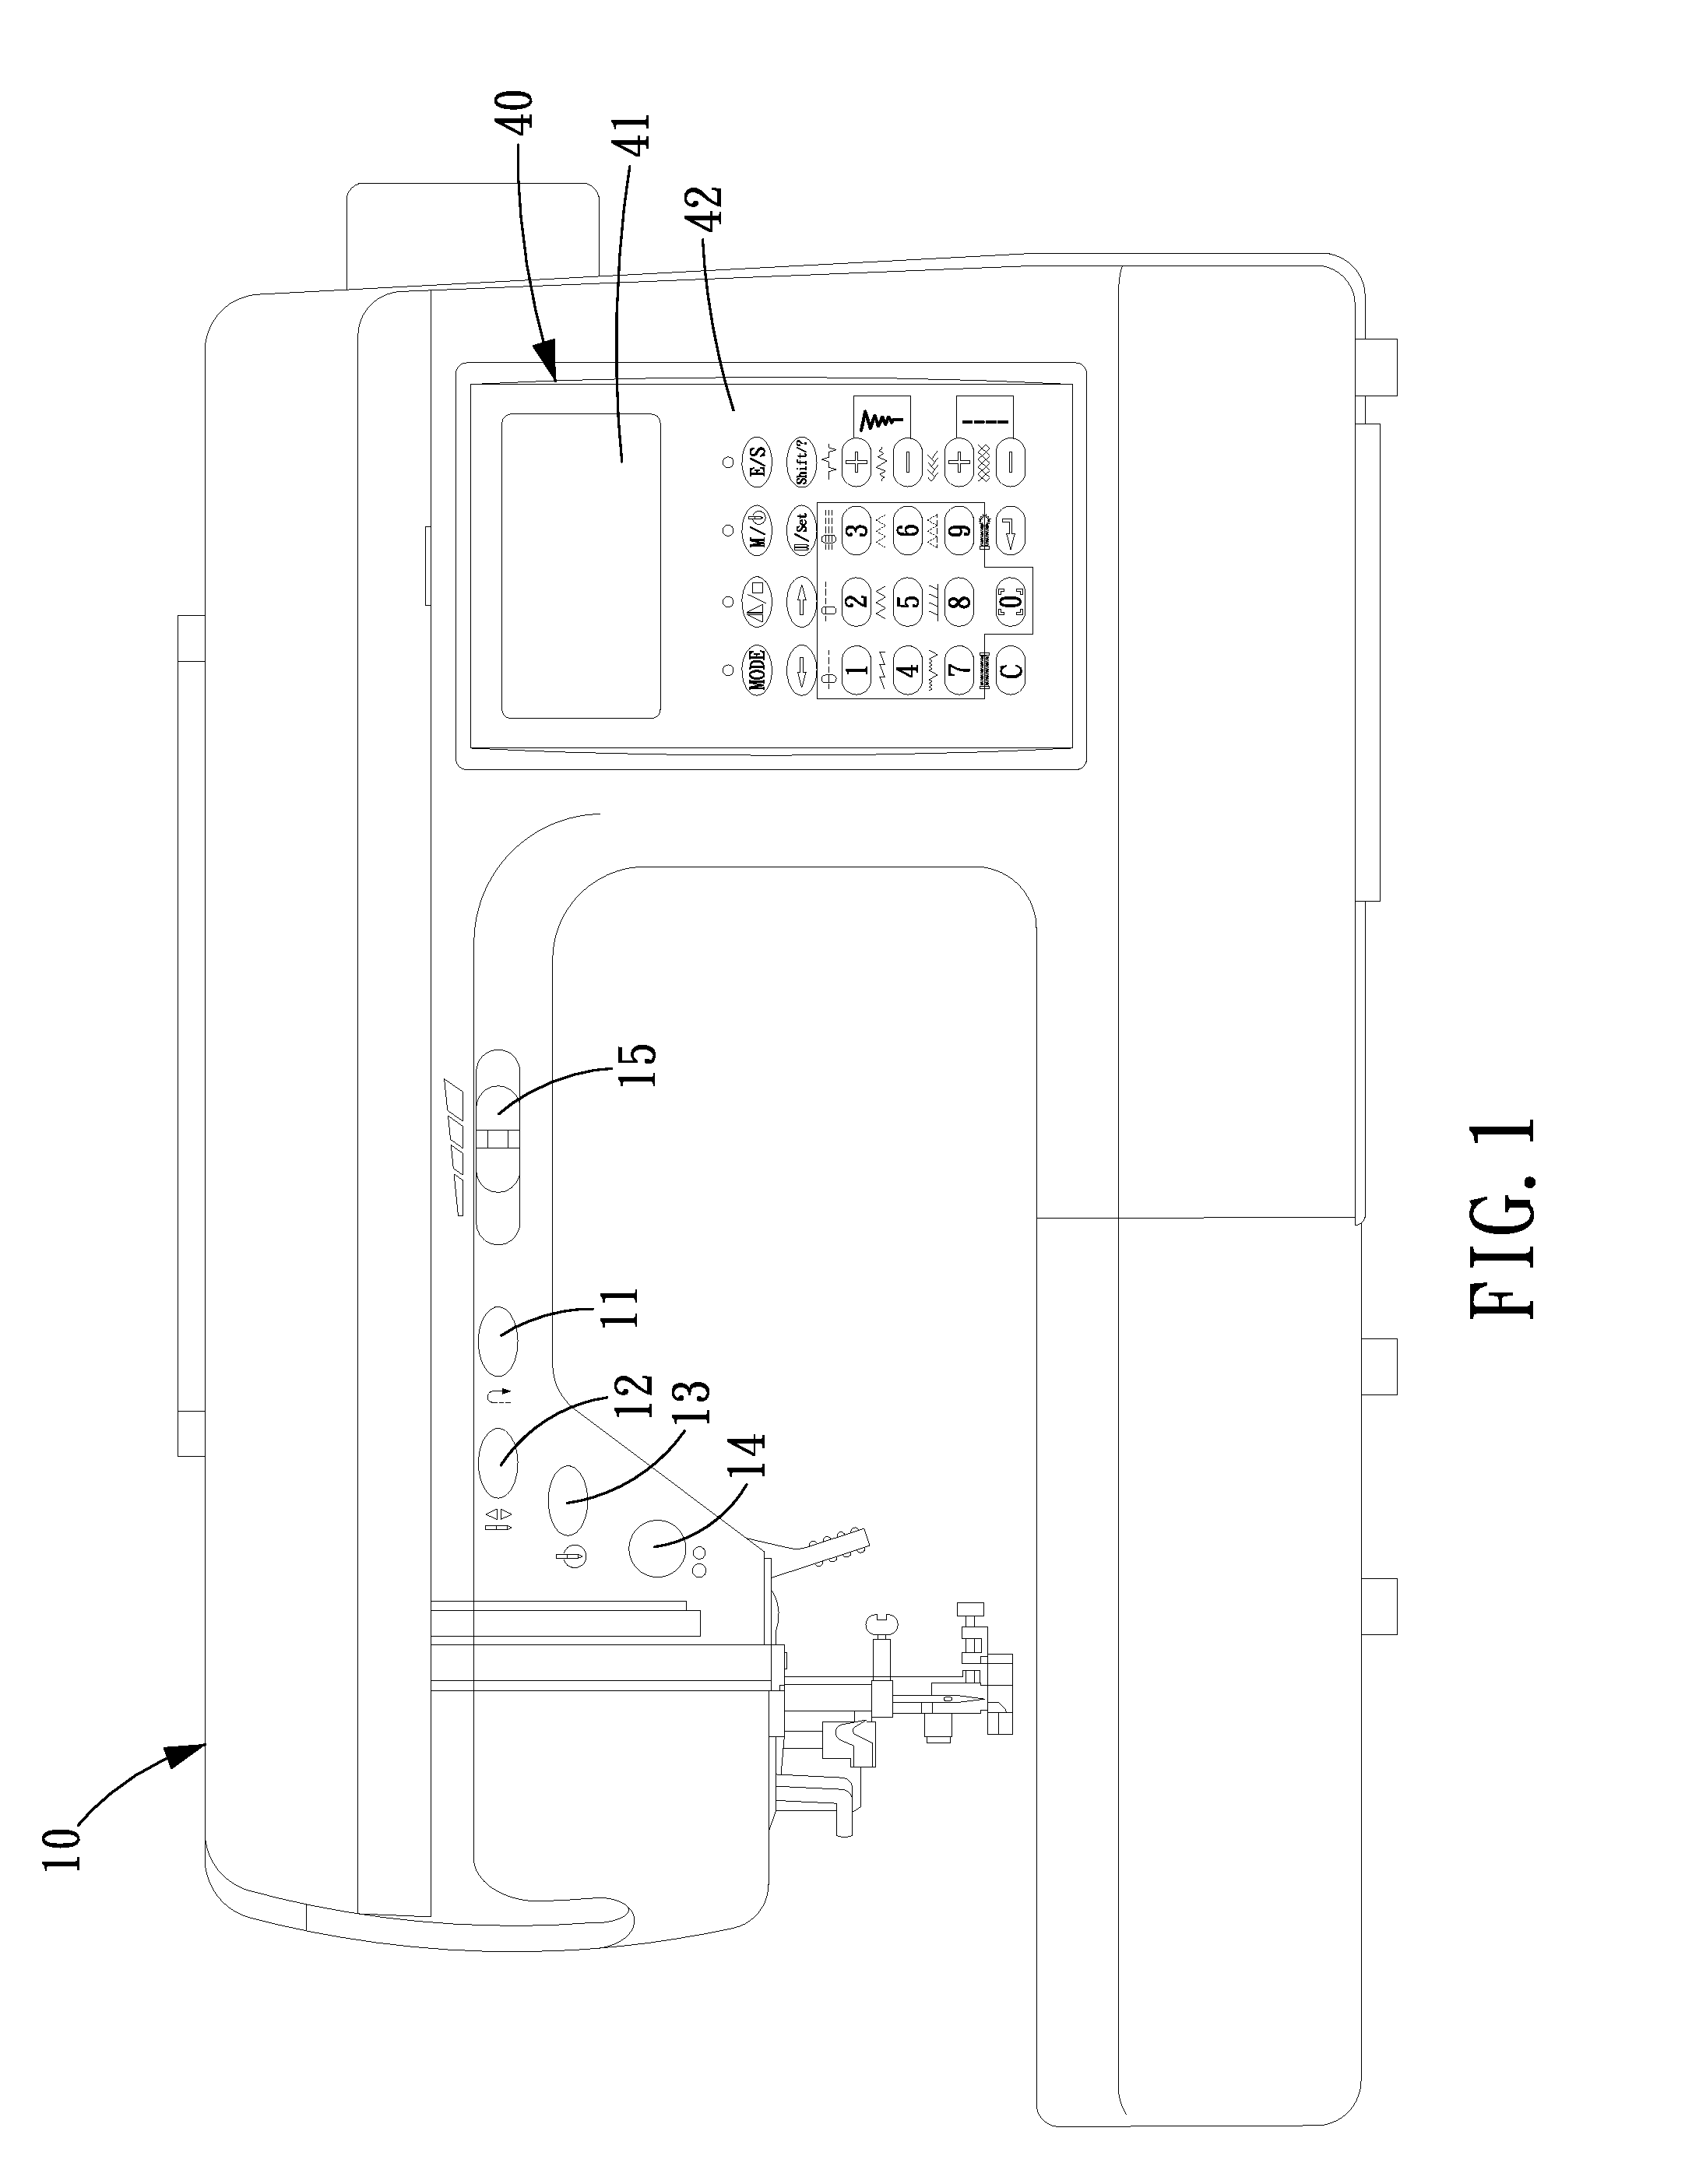 Method and device for controlling sewing patterns of a sewing machine